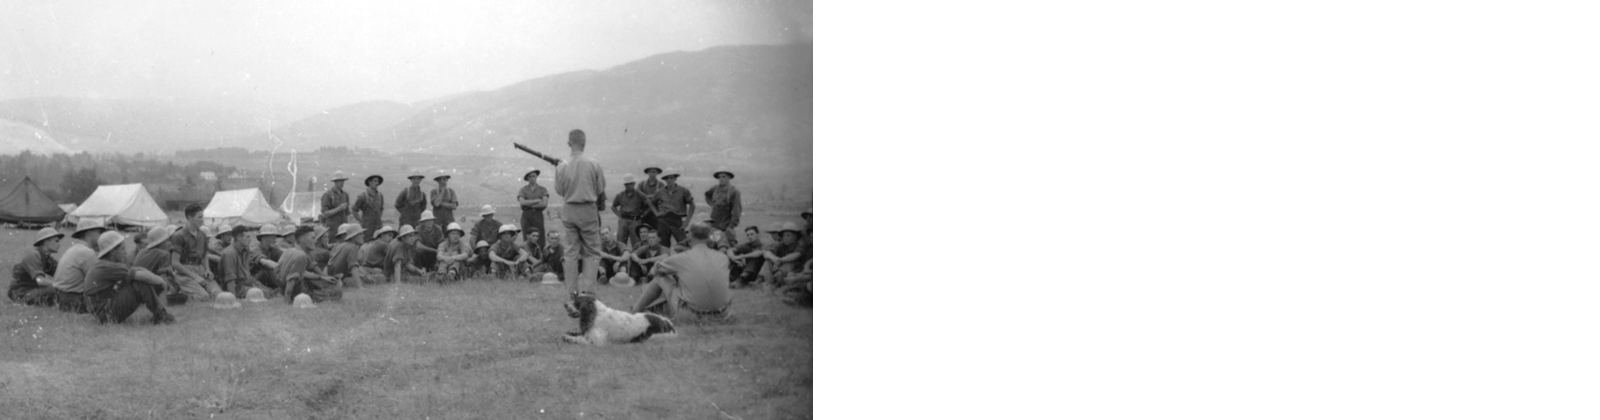 a group of men sit in a field watching a field lecture. A man is demonstrating something infront of them. A dog is in the foreground.